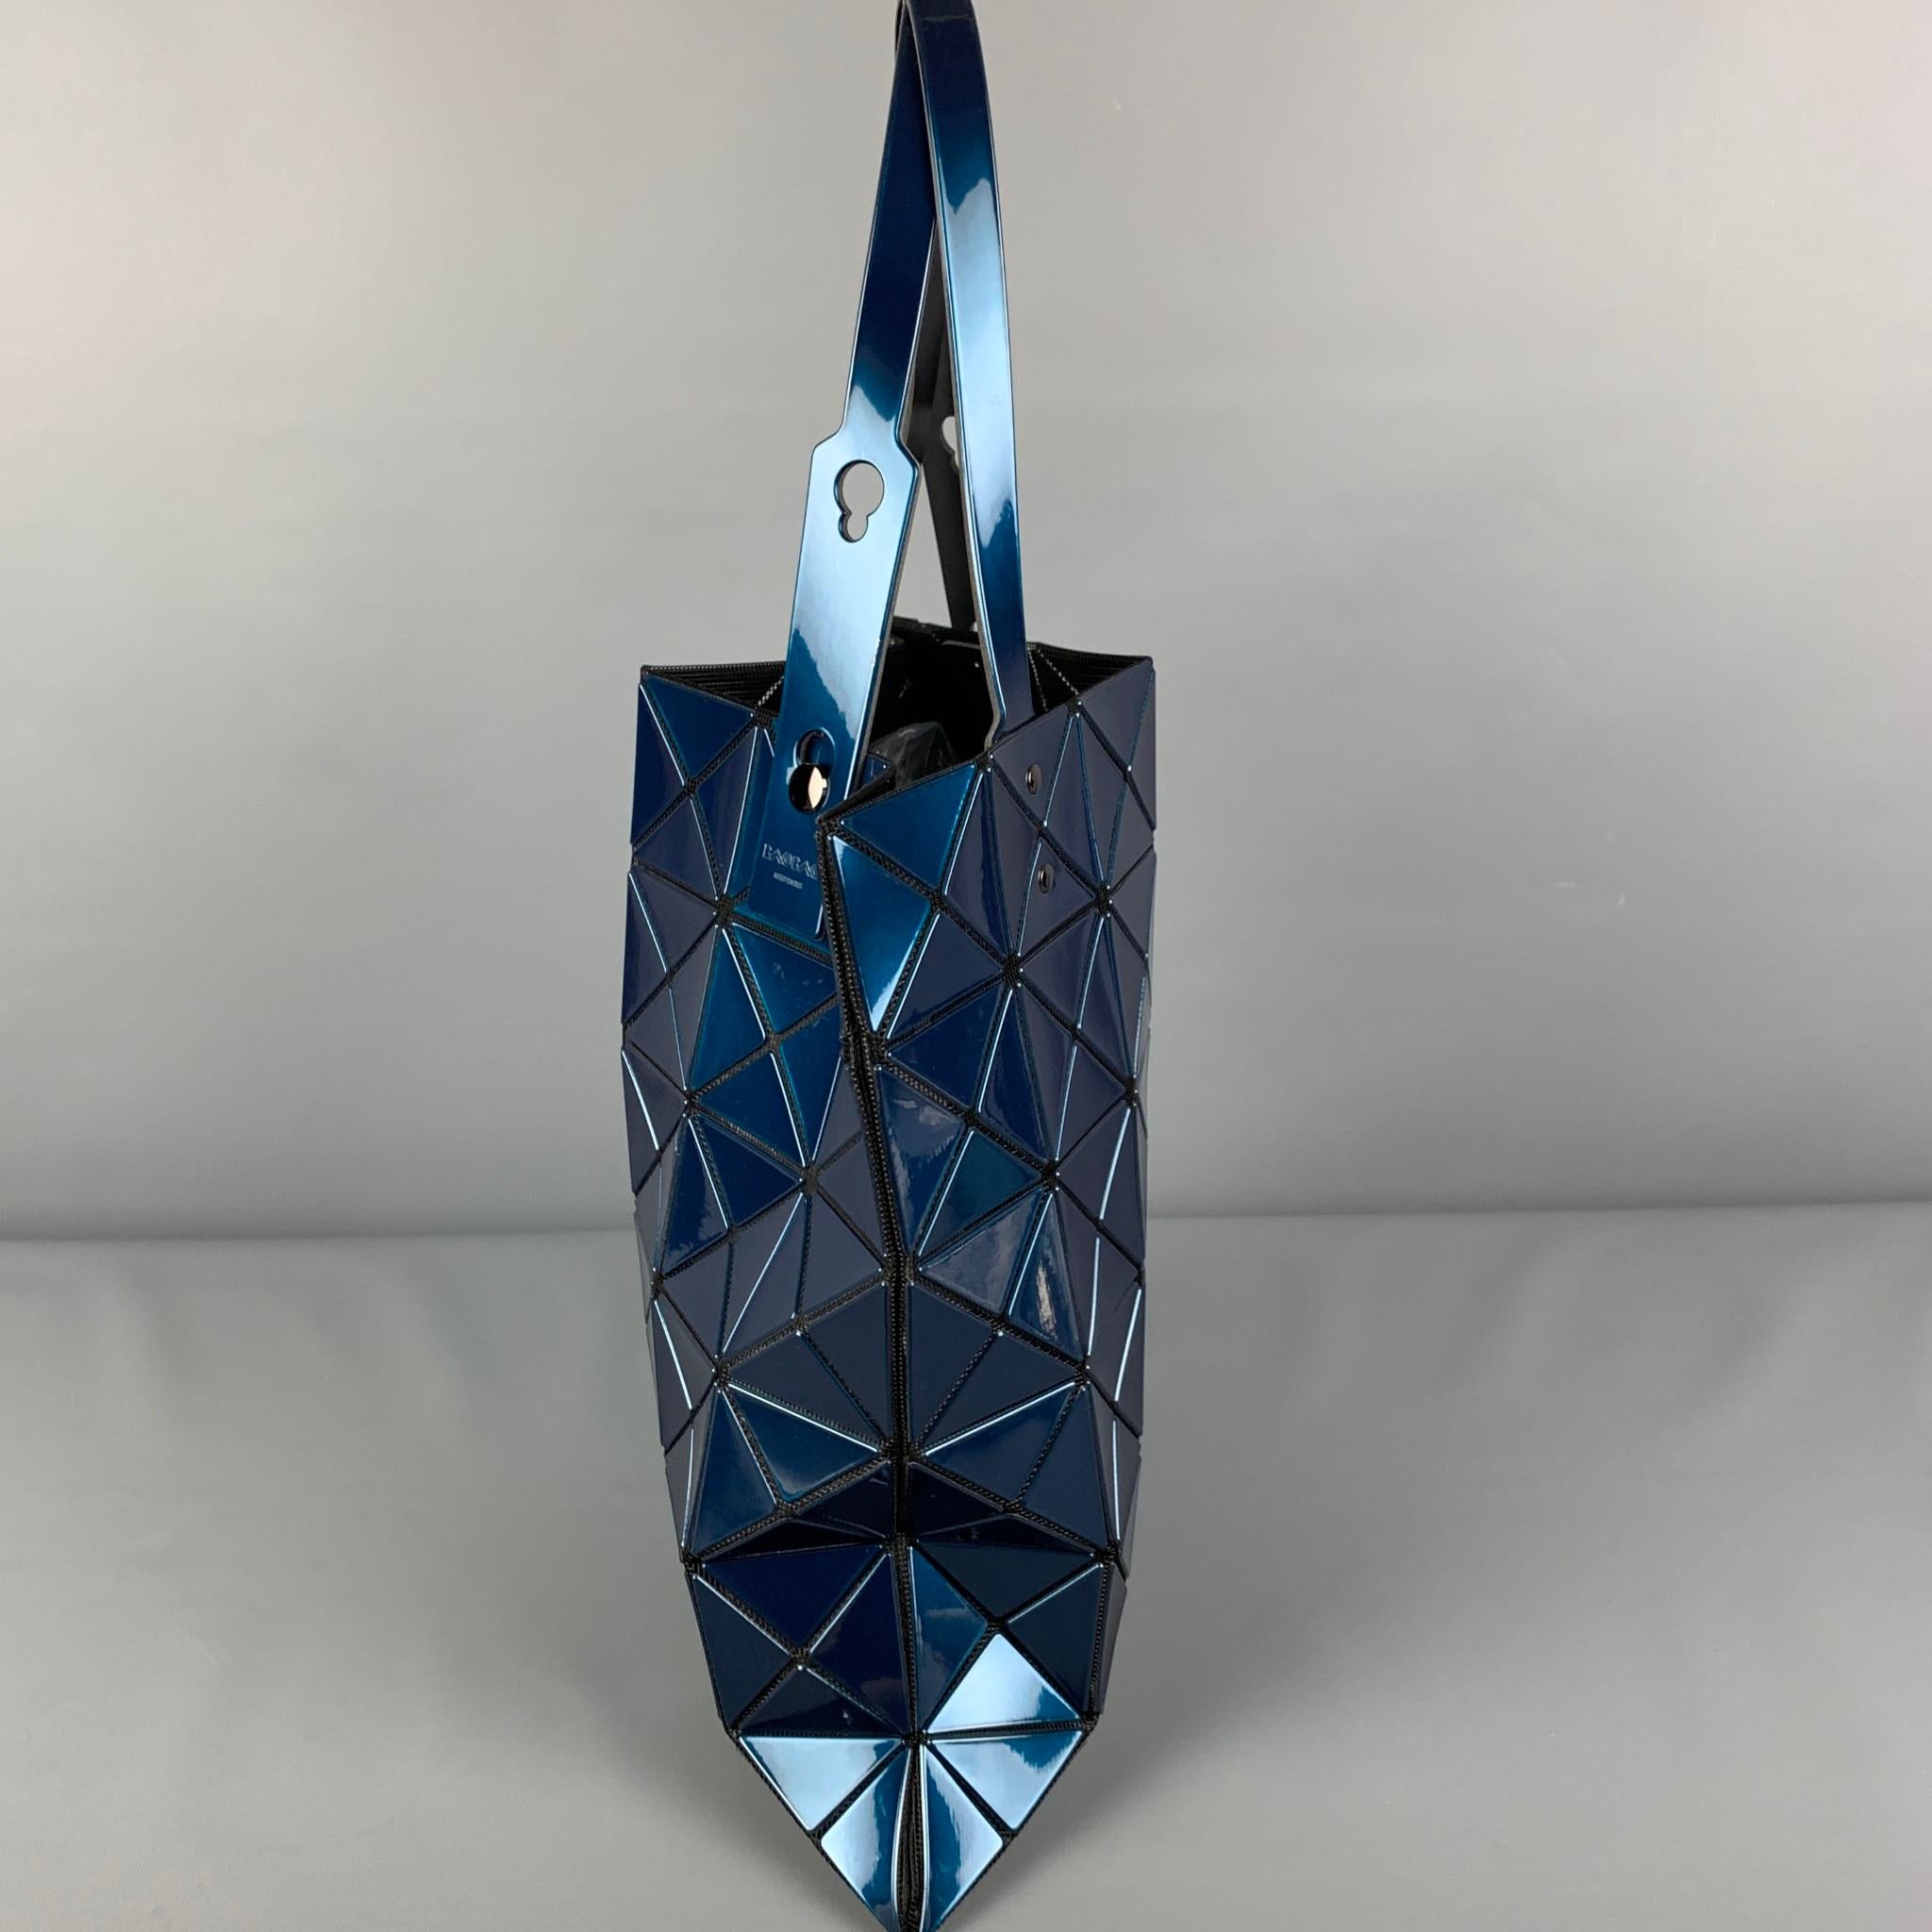 ISSEY MIYAKE BAO BAO bag comes in a blue acetate featuring signature triangular appliqués , mesh tote in black, adjustable top handles, and a inner zipper pocket. Made in Japan. 

Very Good Pre-Owned Condition.

Measurements:

Length: 13.5